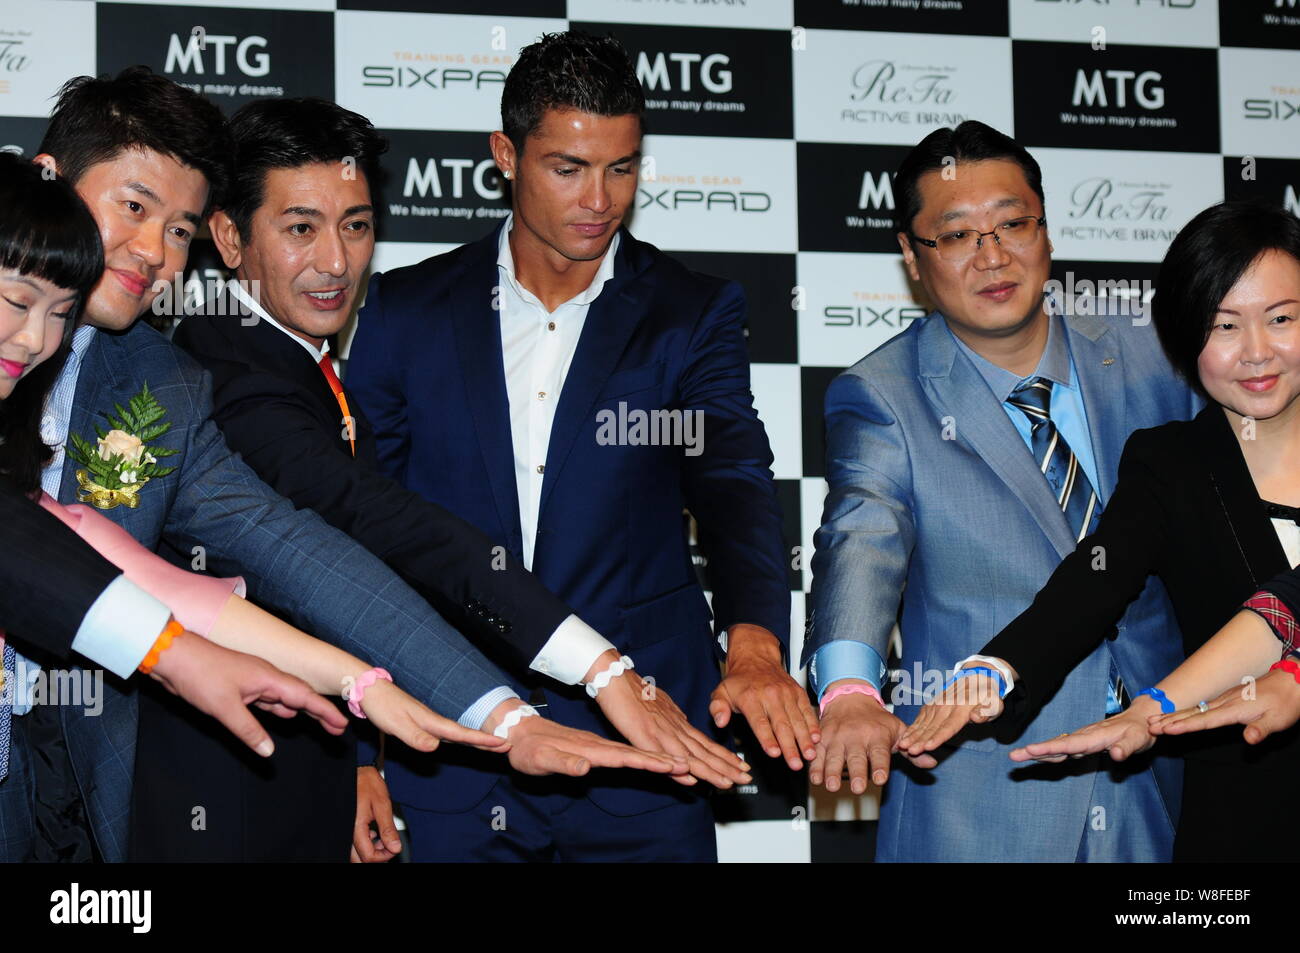 Portuguese football superstar Cristiano Ronaldo, center, poses during a promotional event for MTG Training Gear Sixpad fitness equipment in Shanghai, Stock Photo